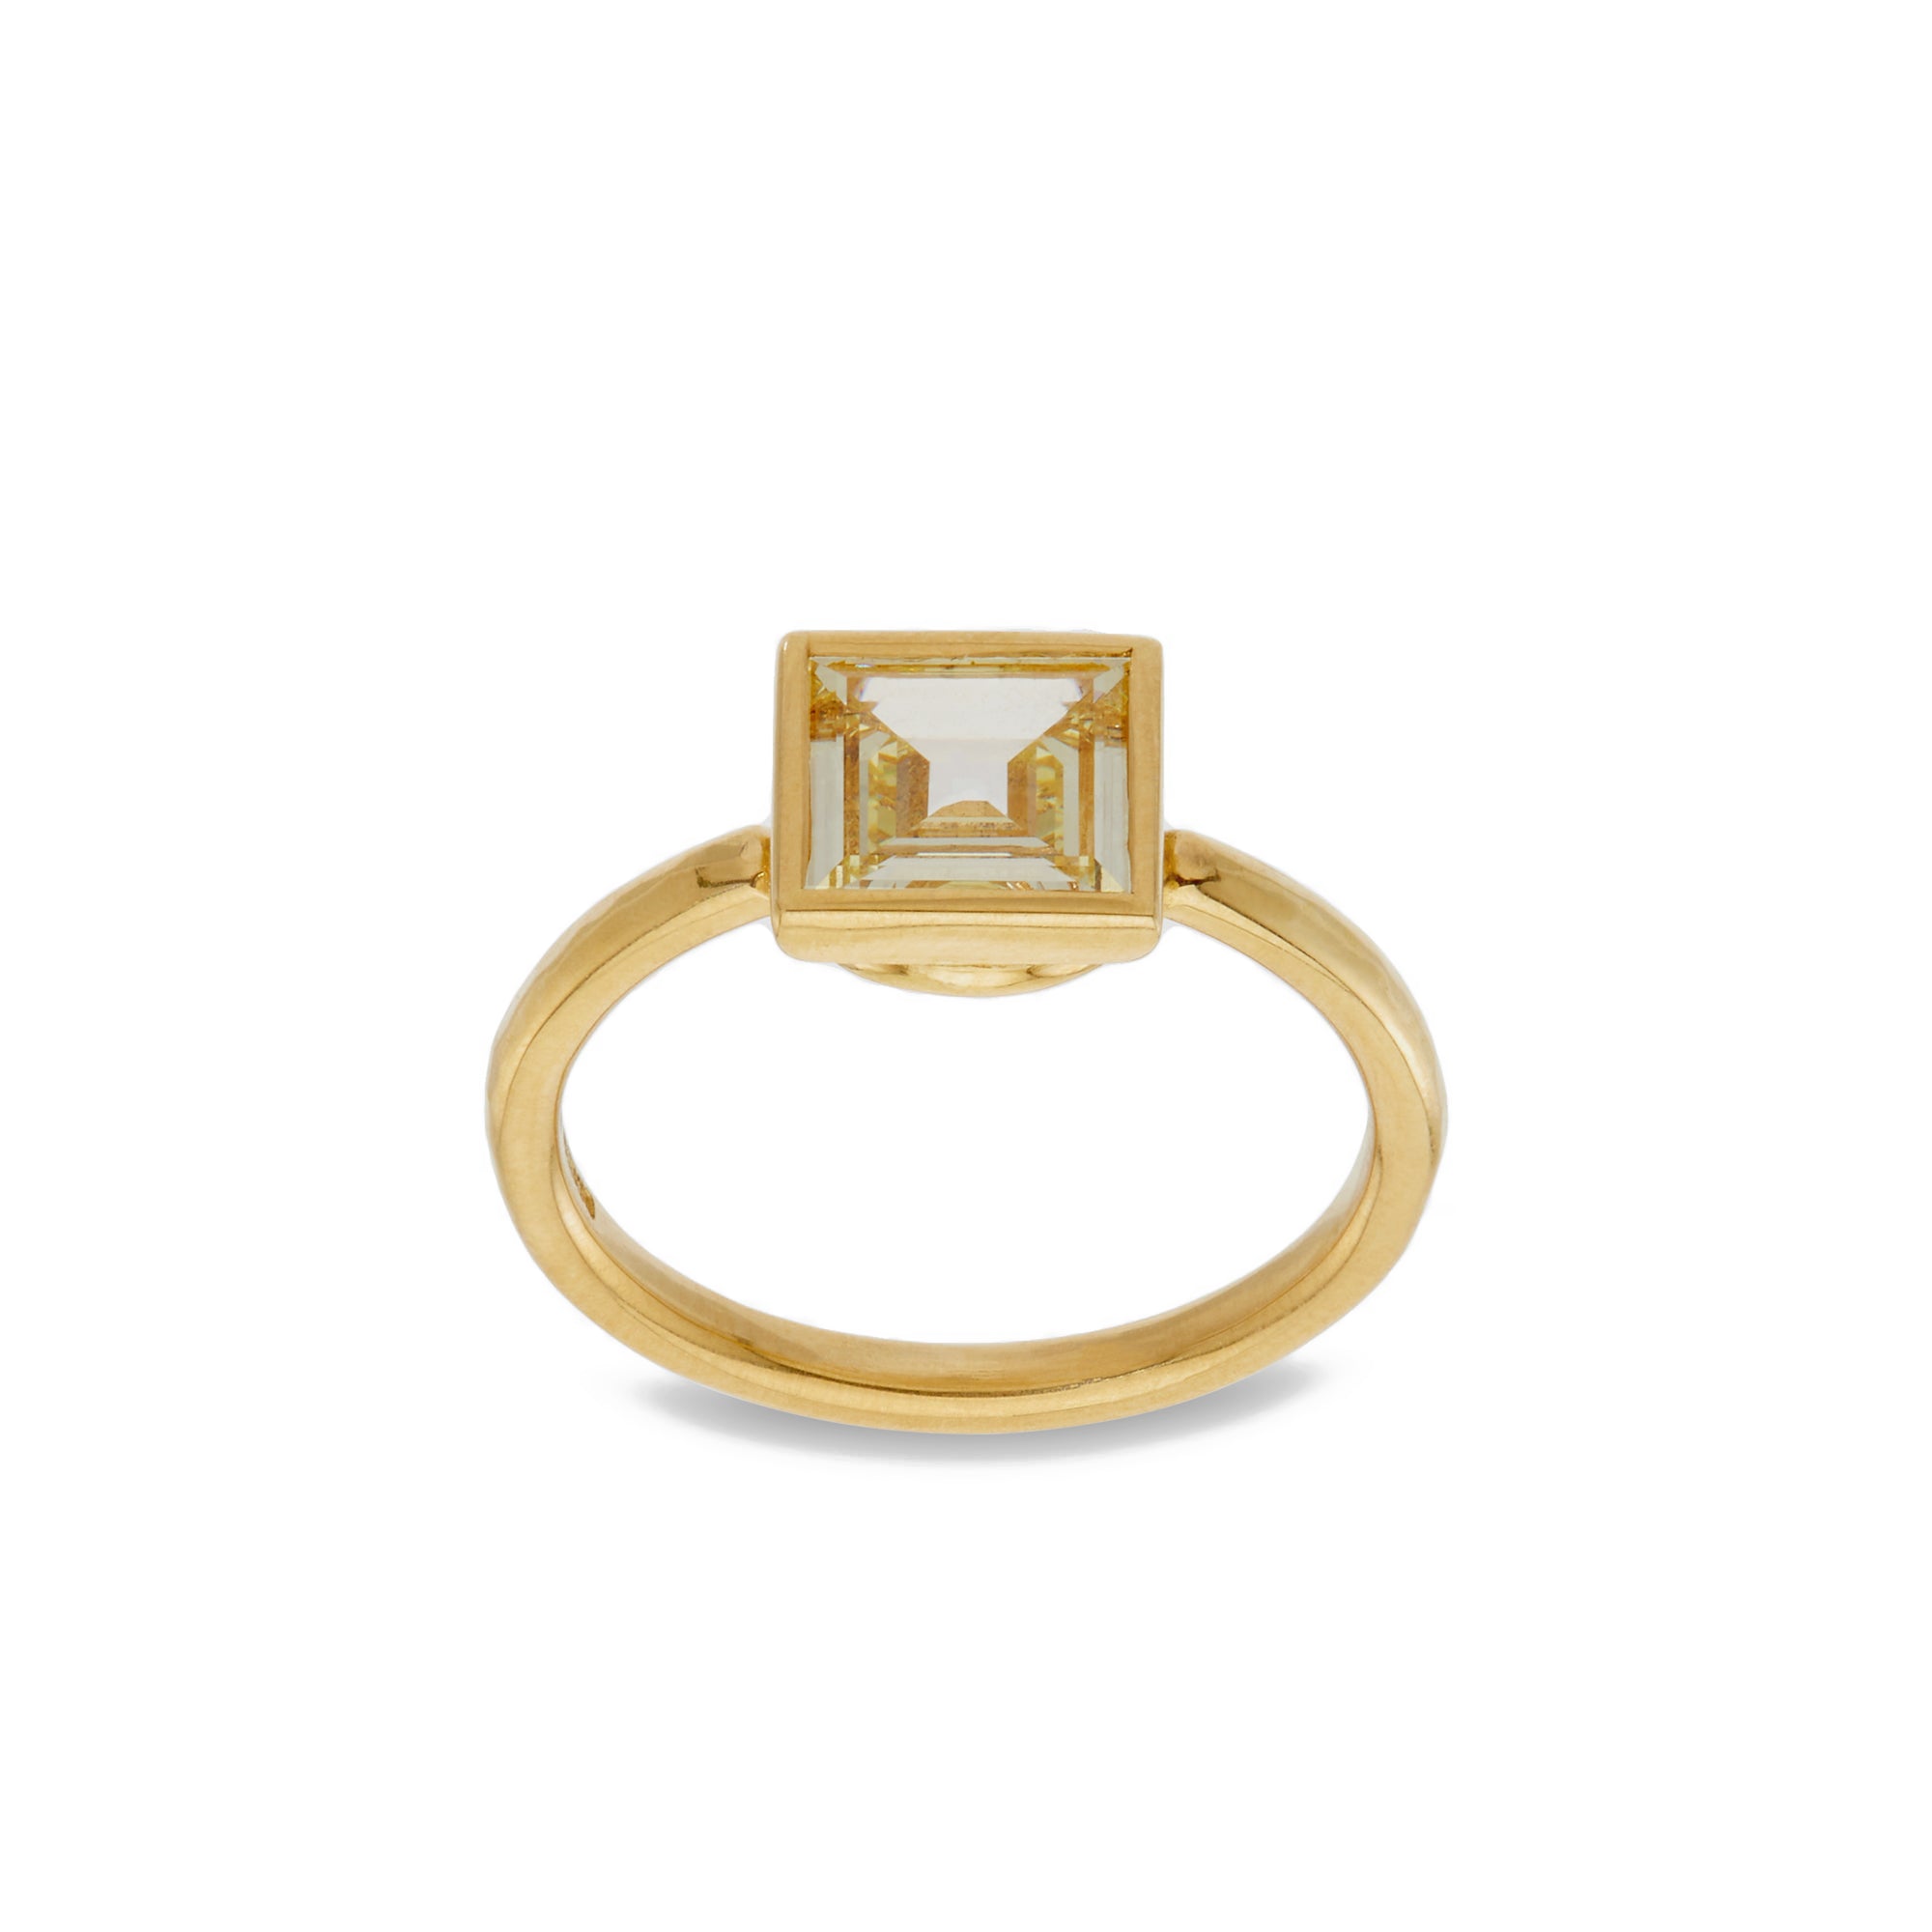 William Welstead - Natural Fancy Yellow Dia Ring view 1